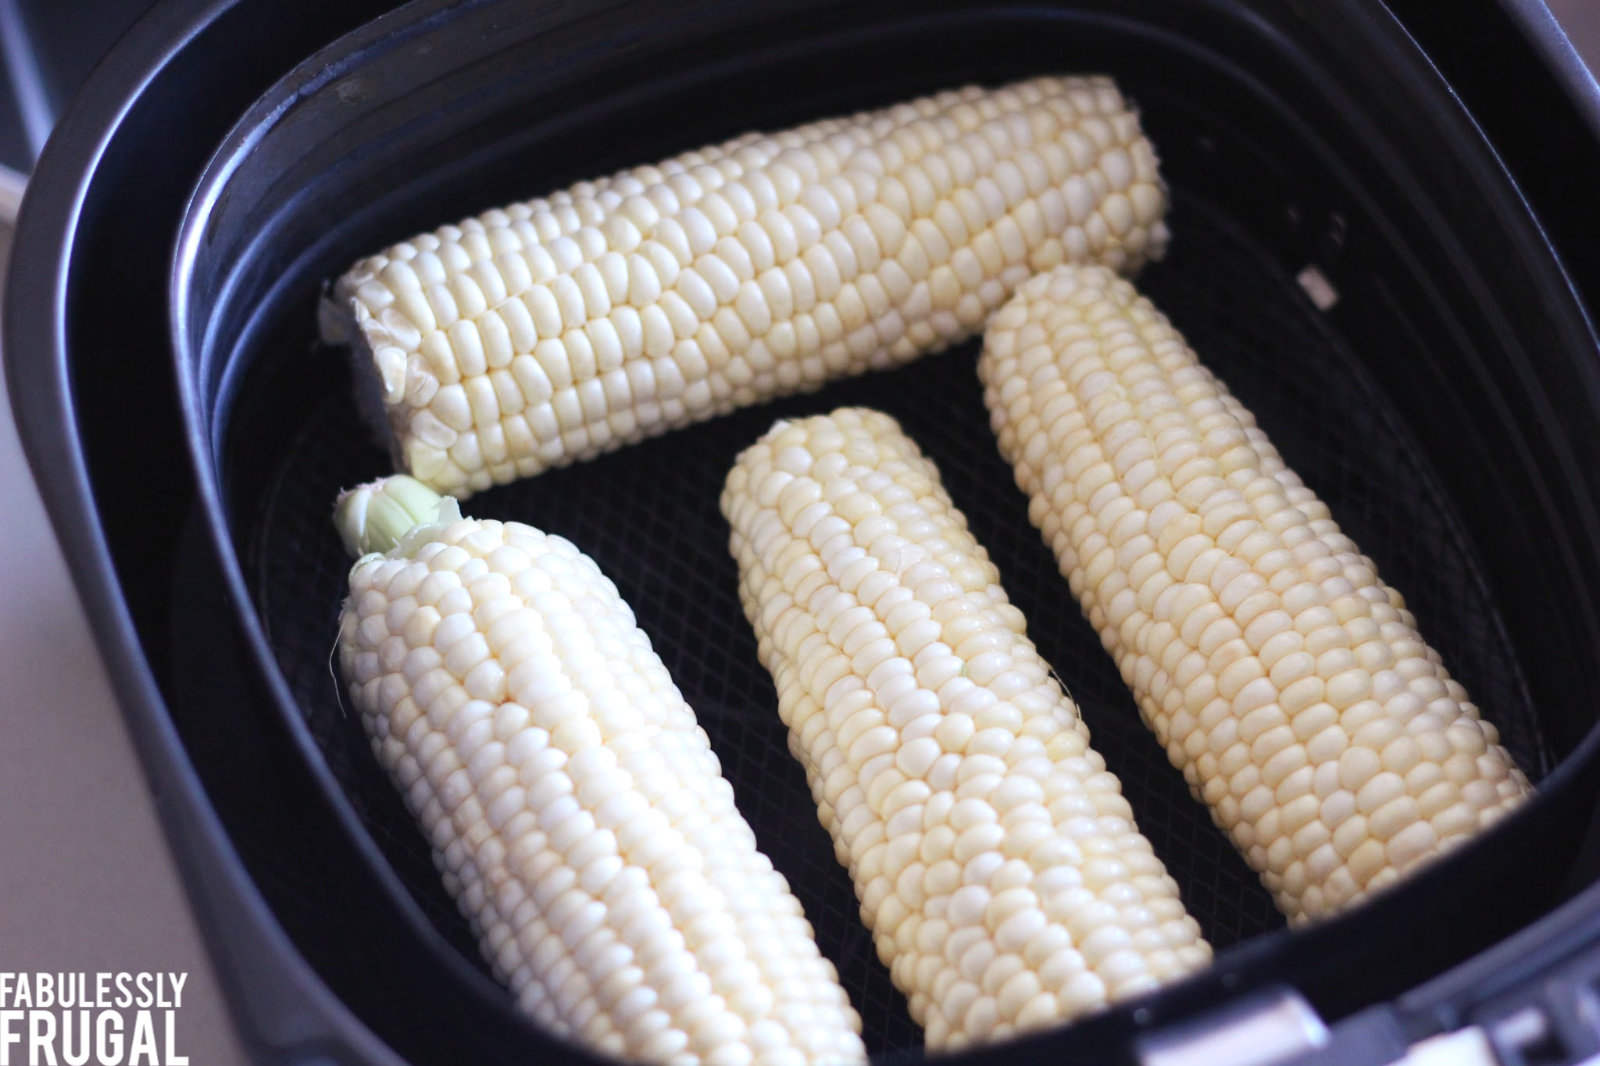 Uncooked corn on the cob in air fryer